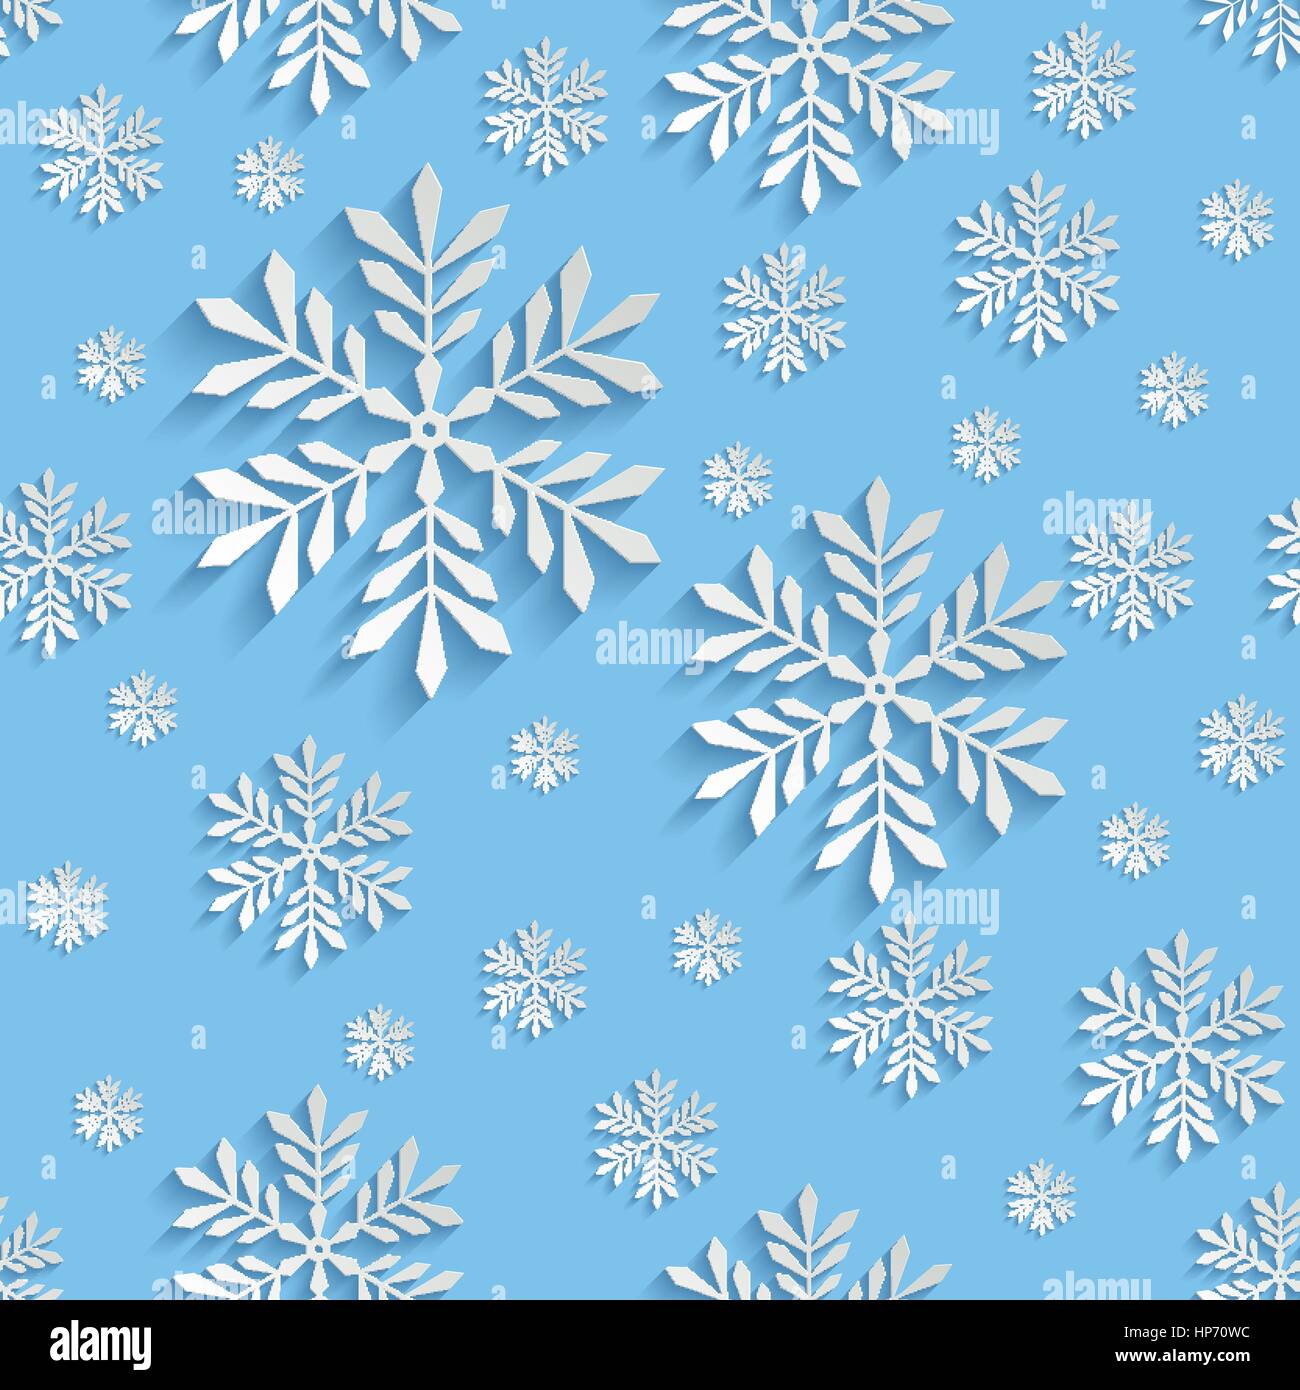 85,400 Small Snowflake Images, Stock Photos, 3D objects, & Vectors